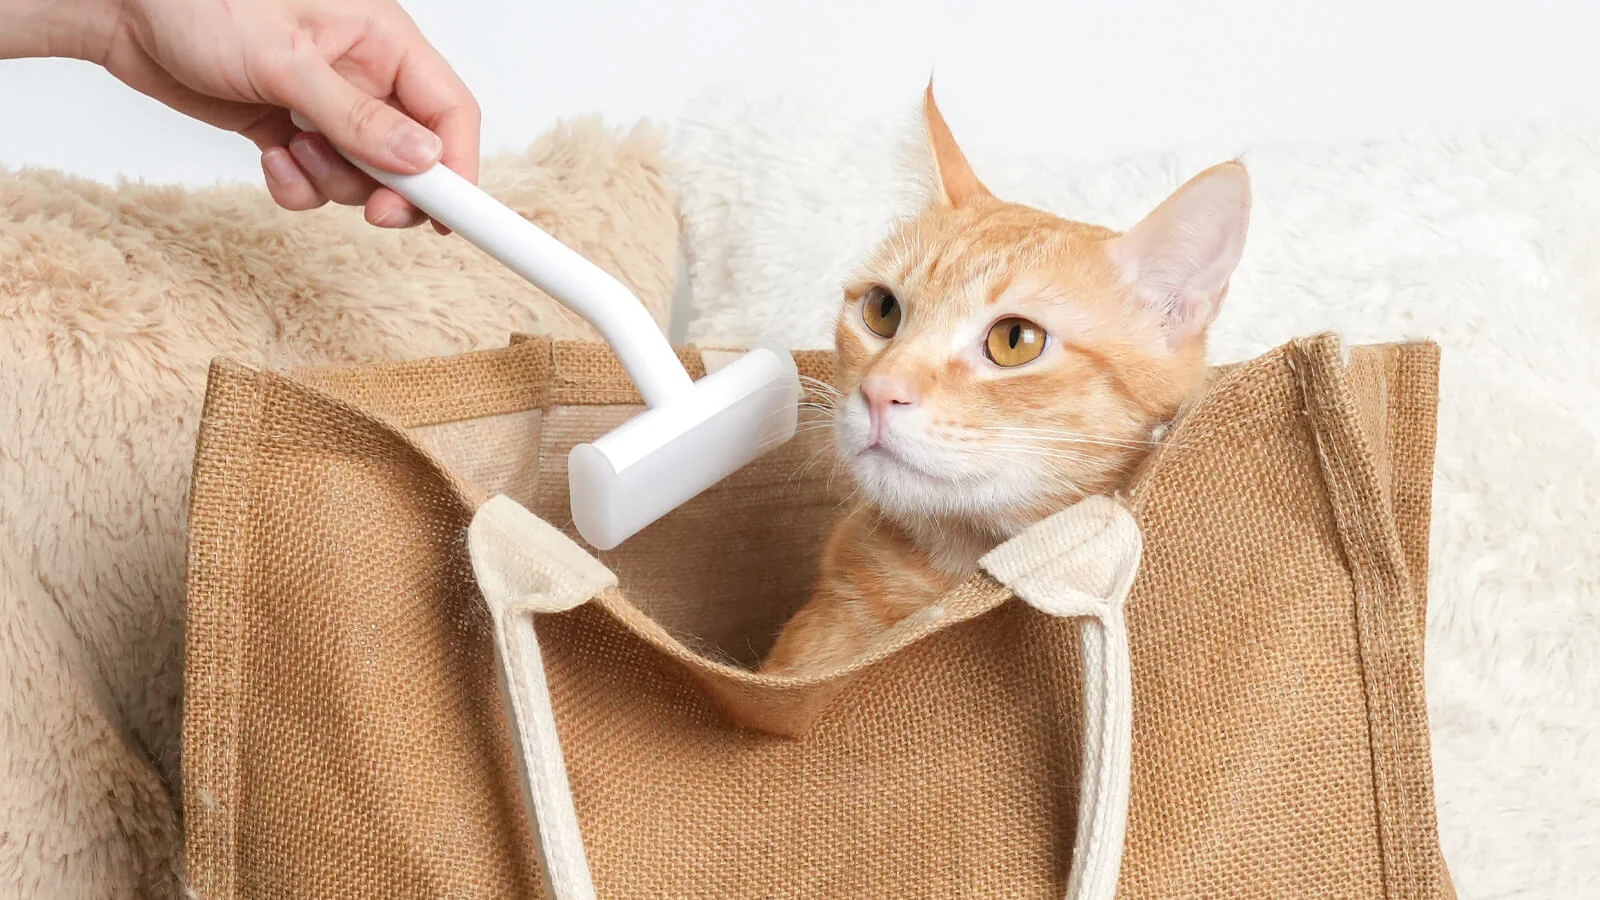 How Often Should You Use a Deshedding Tool for Cats?